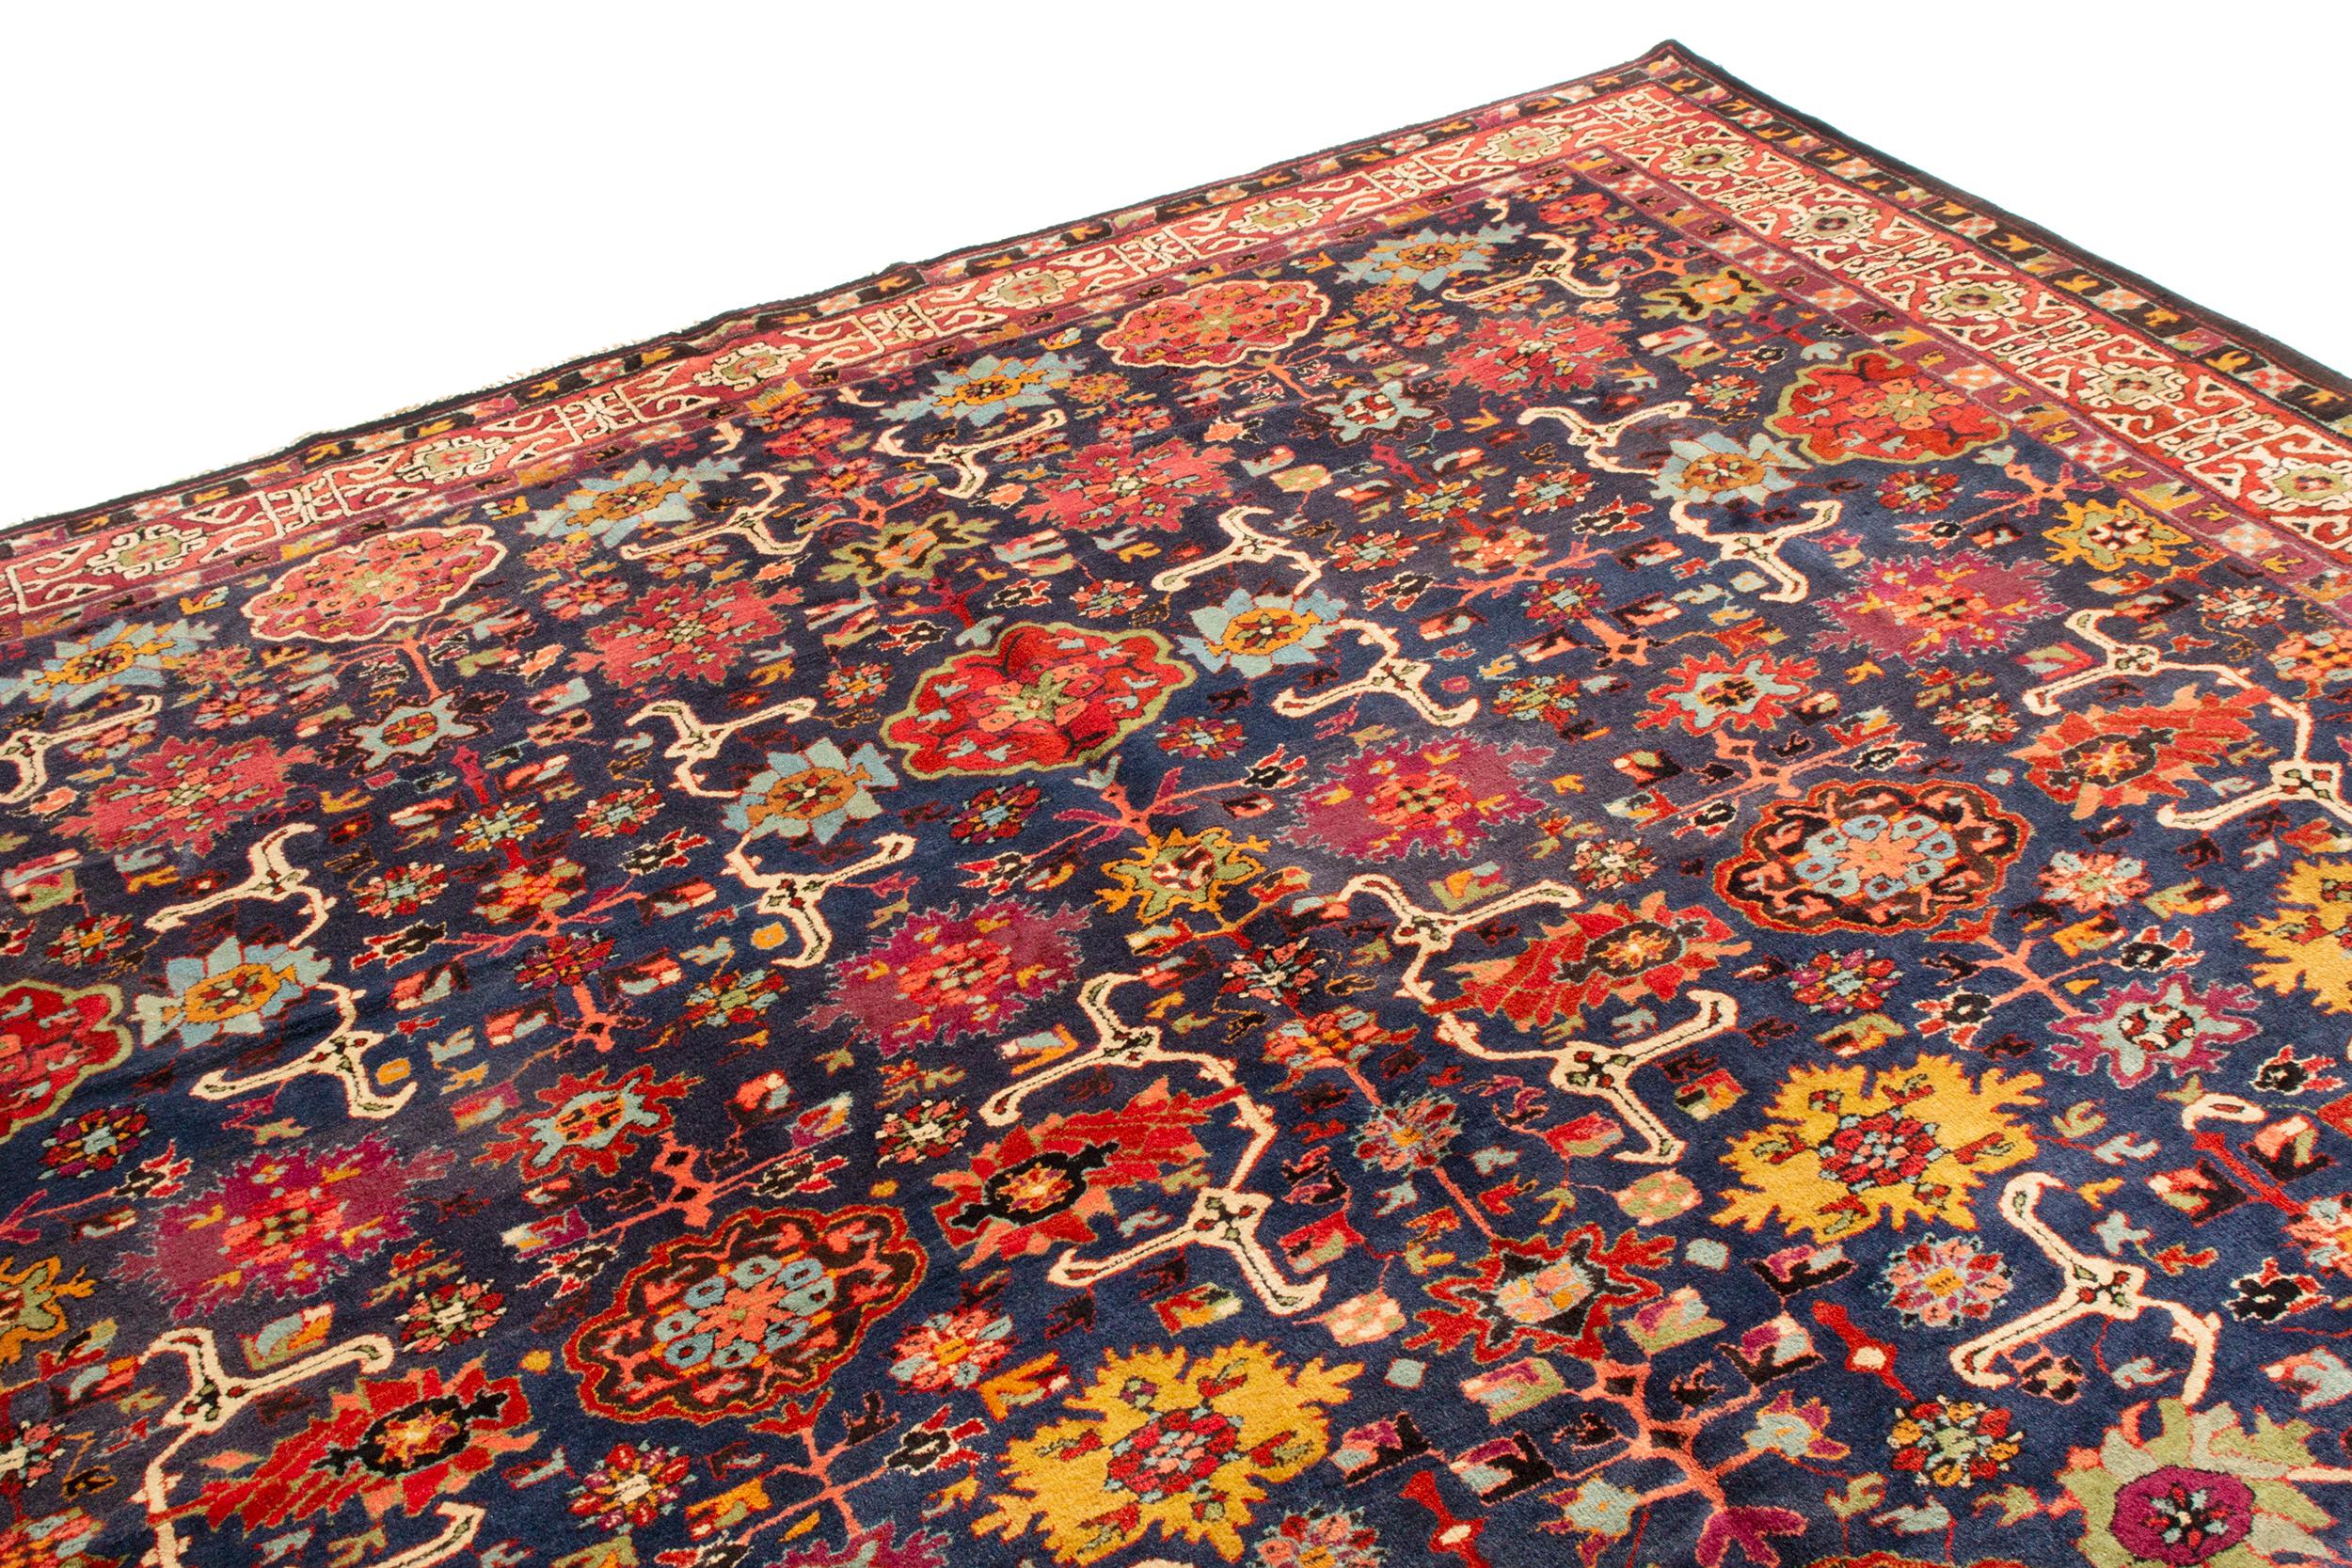 This antique German 1930s German floral has enjoys soft, finely woven wool pile. This symmetrical floral pattern is a distinct European interpretation of oriental carpets, one of several German pieces from this decade with Eastern inspiration. The